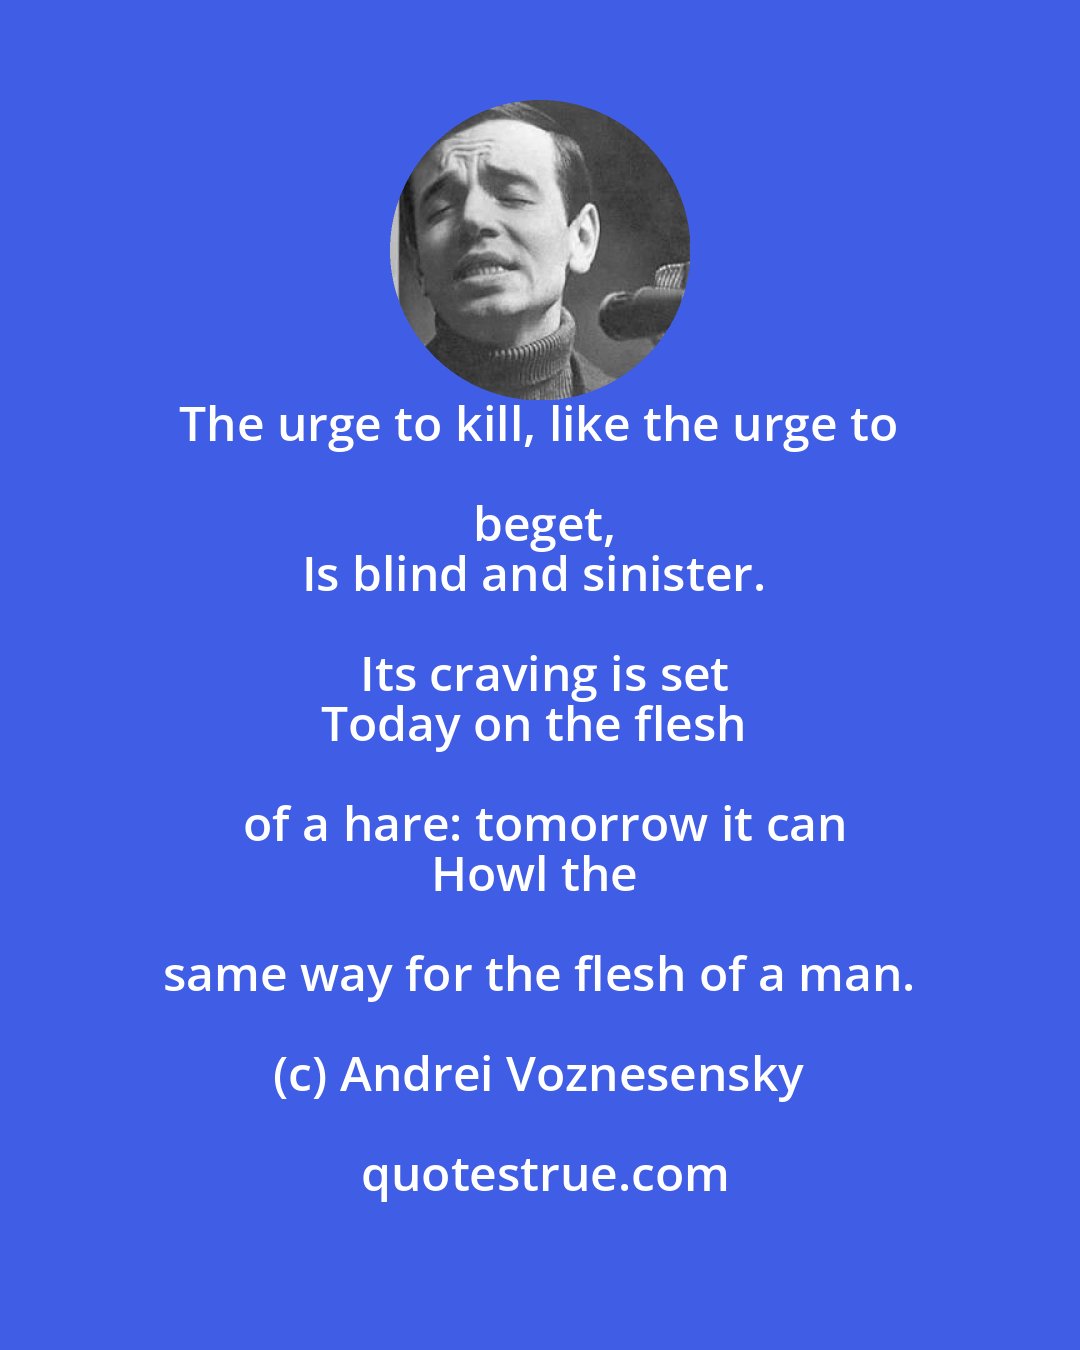 Andrei Voznesensky: The urge to kill, like the urge to beget,
Is blind and sinister. Its craving is set
Today on the flesh of a hare: tomorrow it can
Howl the same way for the flesh of a man.